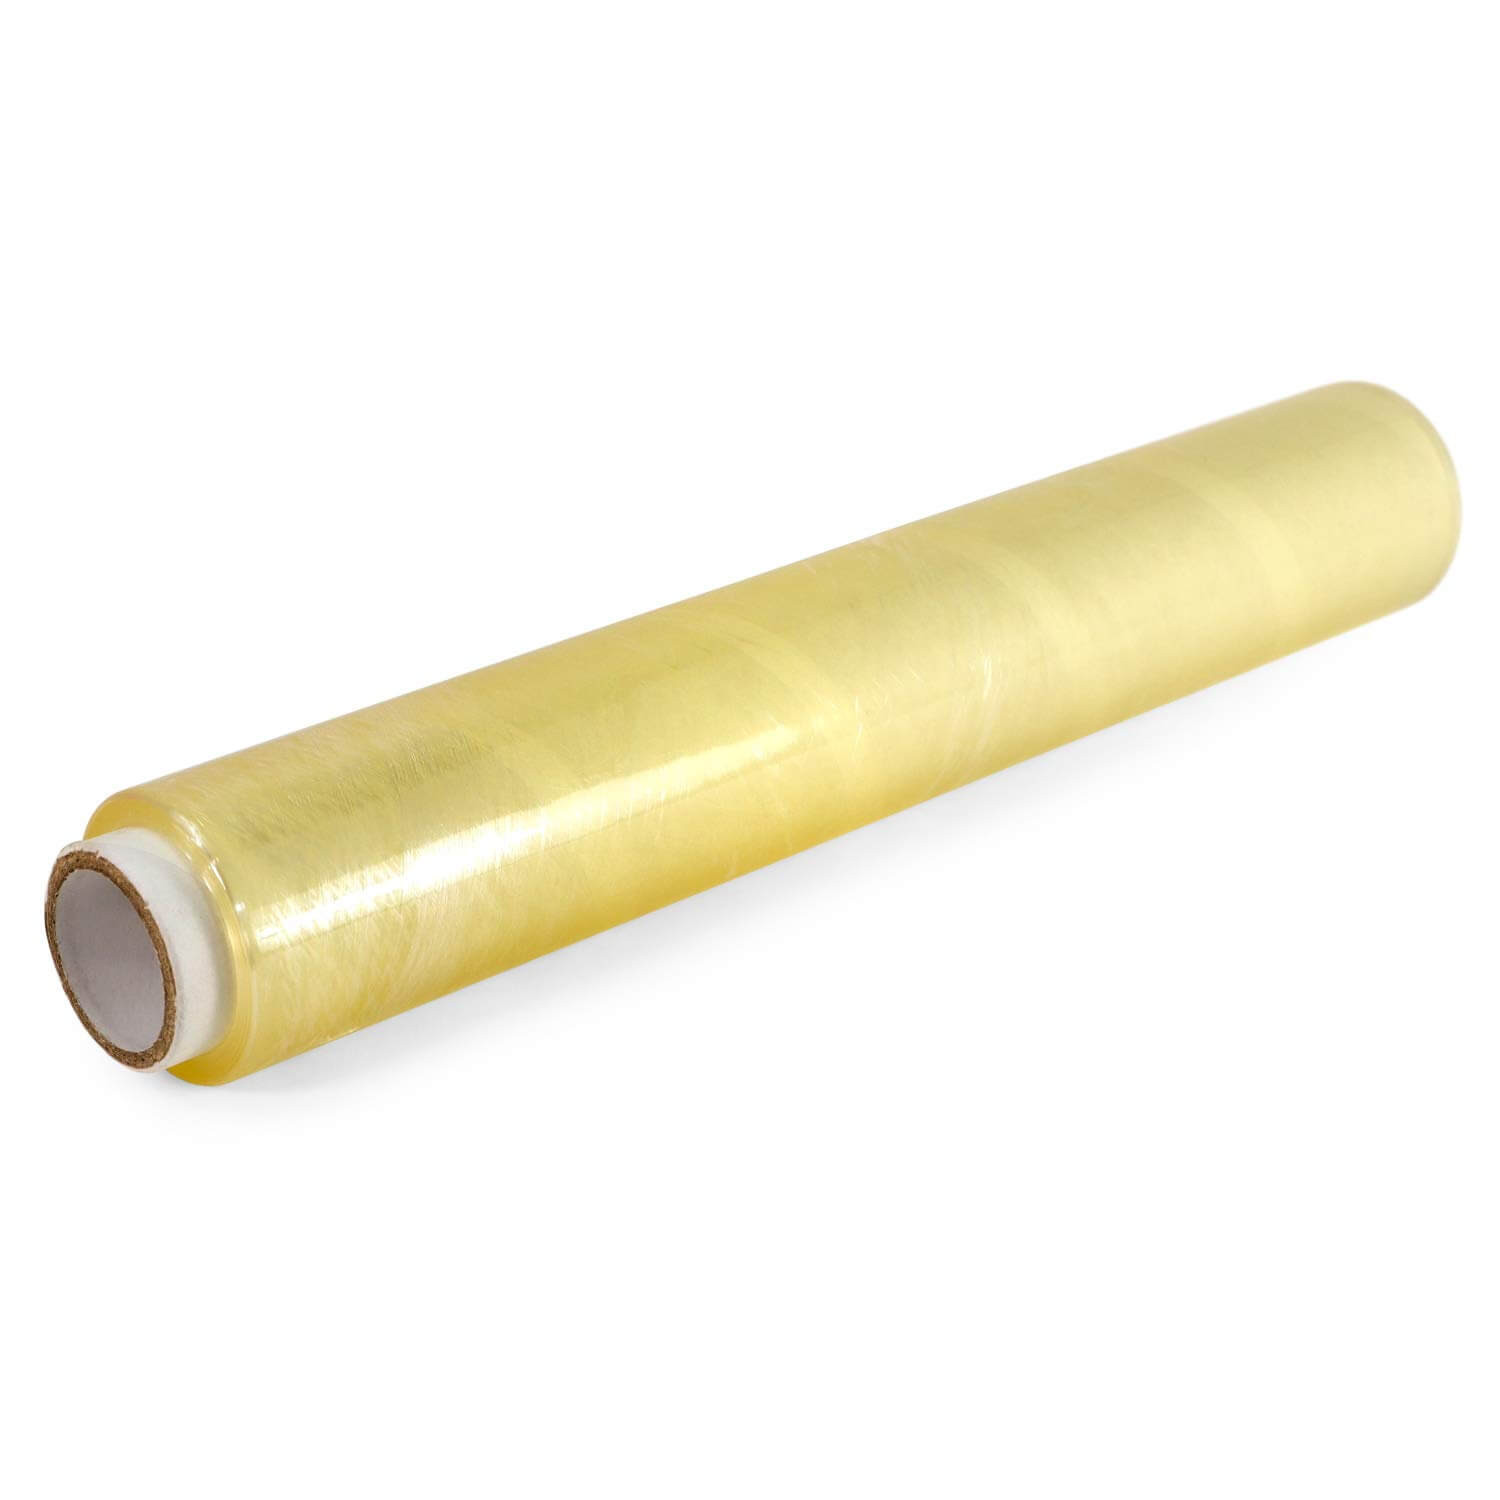 18 x 1,000' Butcher Paper Rolls — Gold Seal Specialty Papers